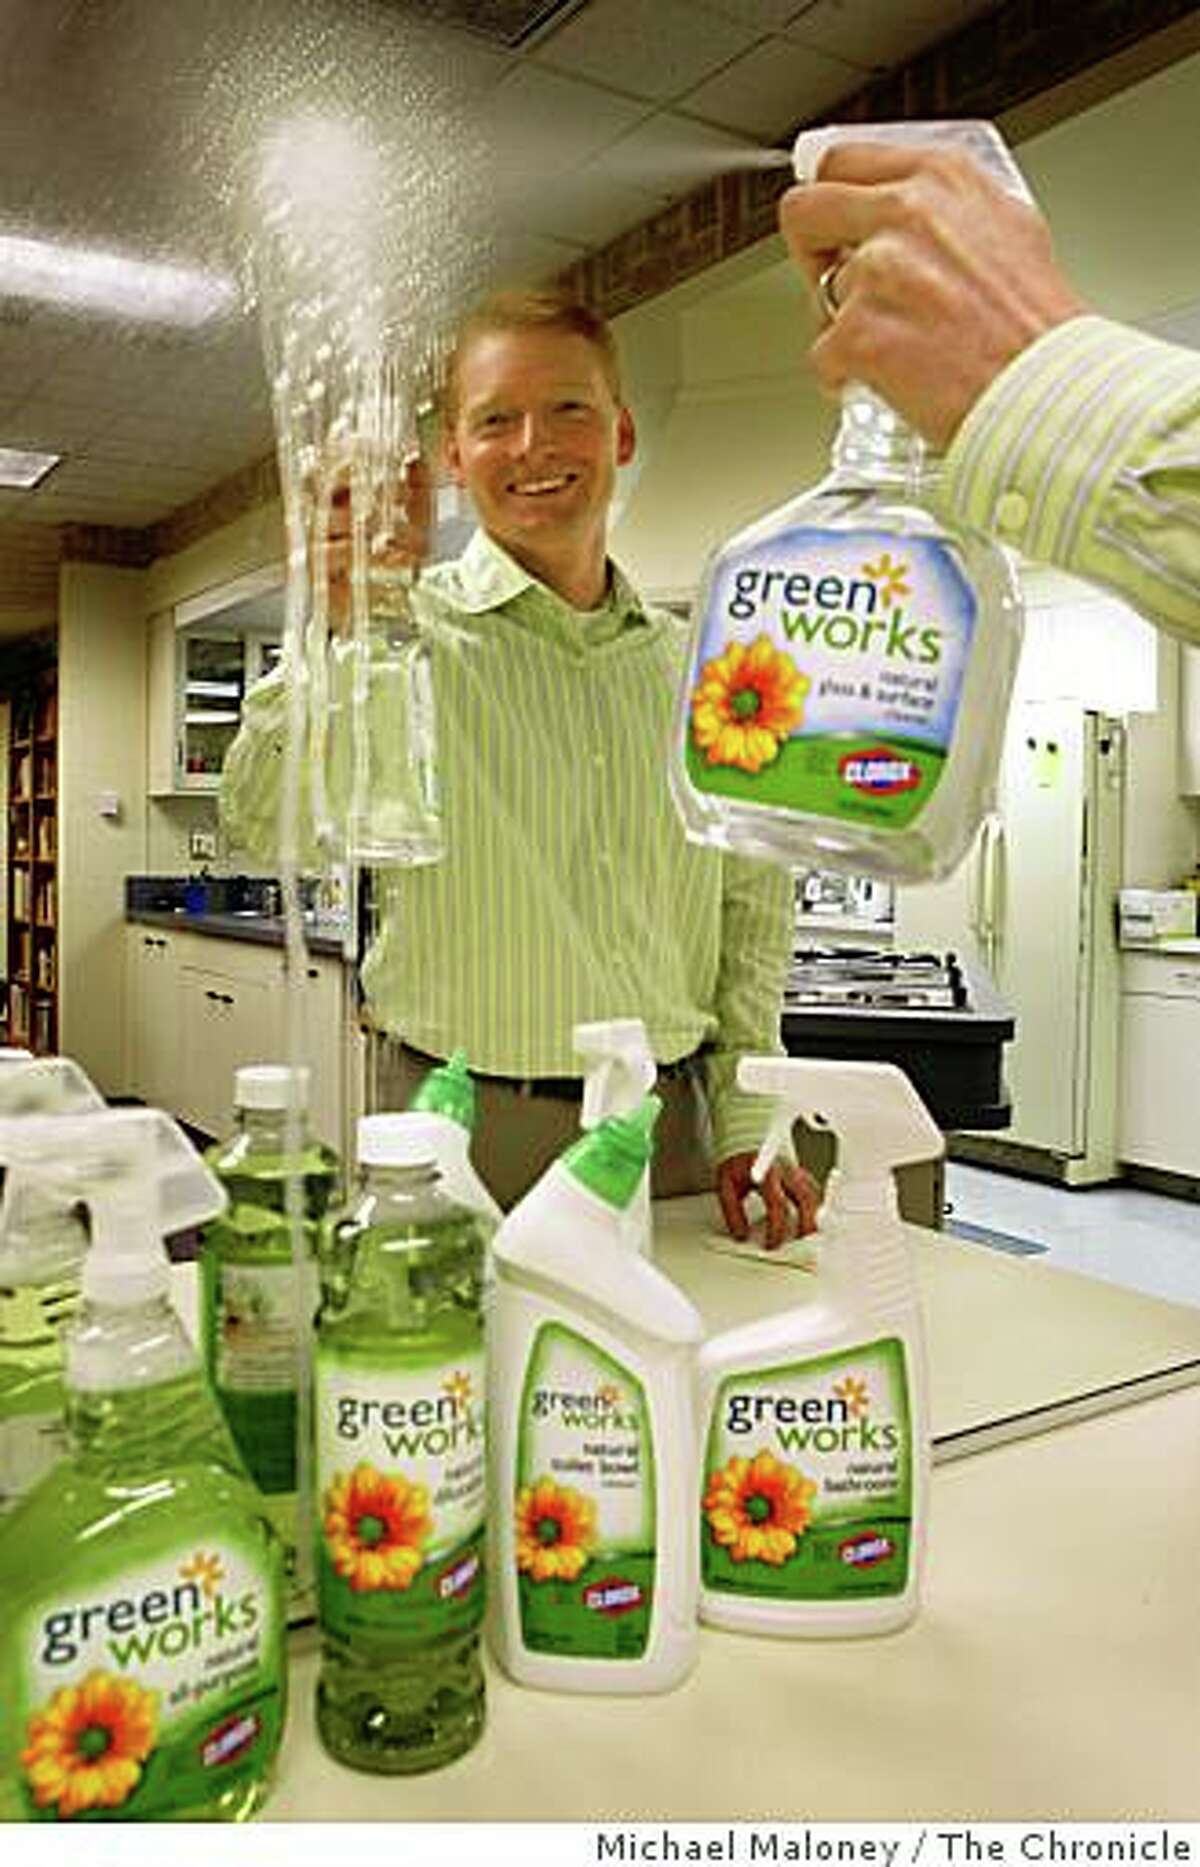 Matt Kohler, brand manager for the Green Works line of products at Clorox demonstrates one of the Green Works products in the Clorox test kitchen in Pleasanton, CA on Thursday, January 1, 2008. Clorox has introduced a line of environmentally-friendly household cleaning products called Green Works, made with natural, biodegradable, non-petroleum-based ingredients. Photo by Michael Maloney / The Chronicle